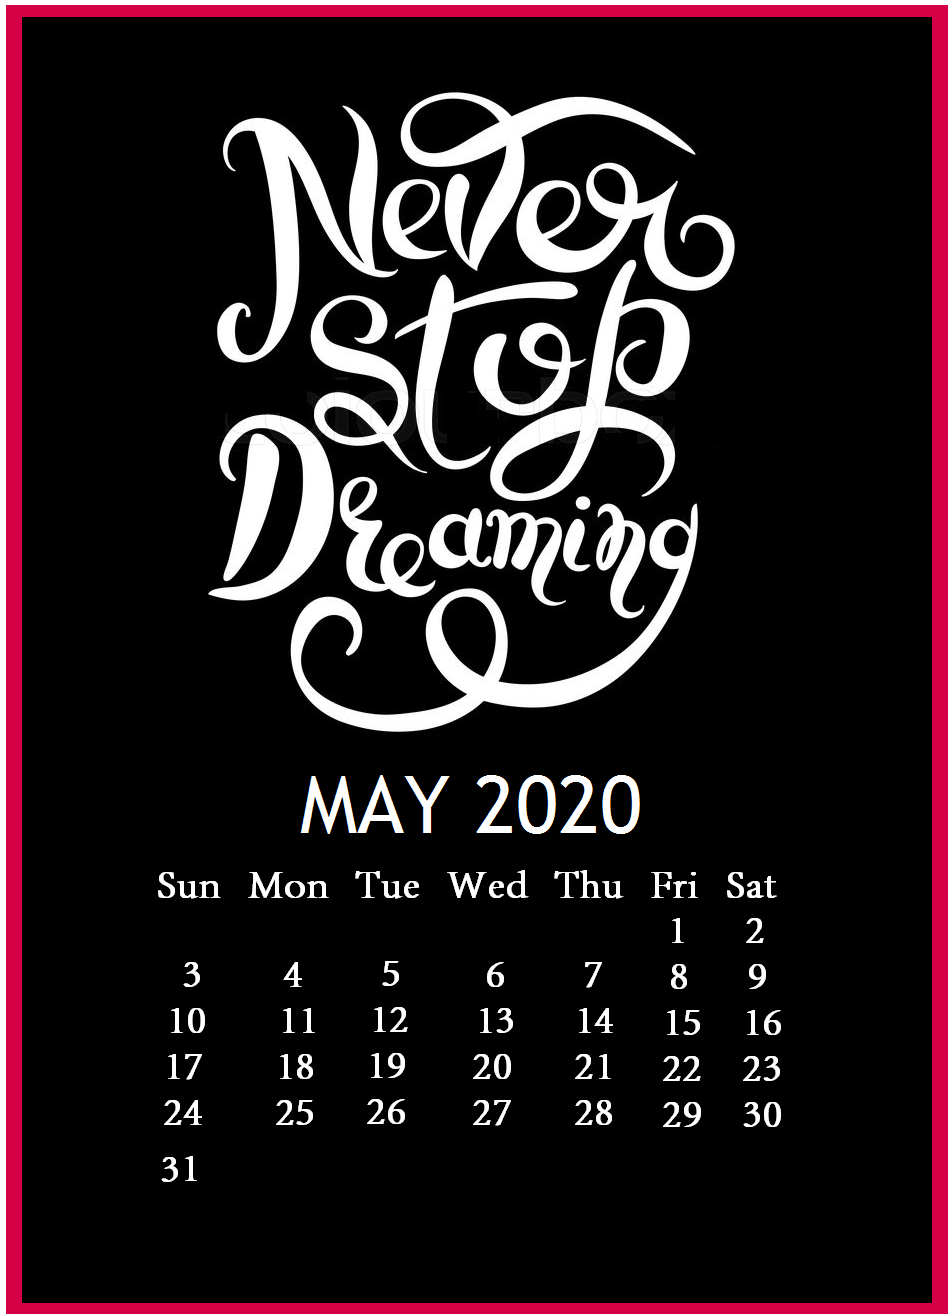 May 2020 Famous Quotes Calendar